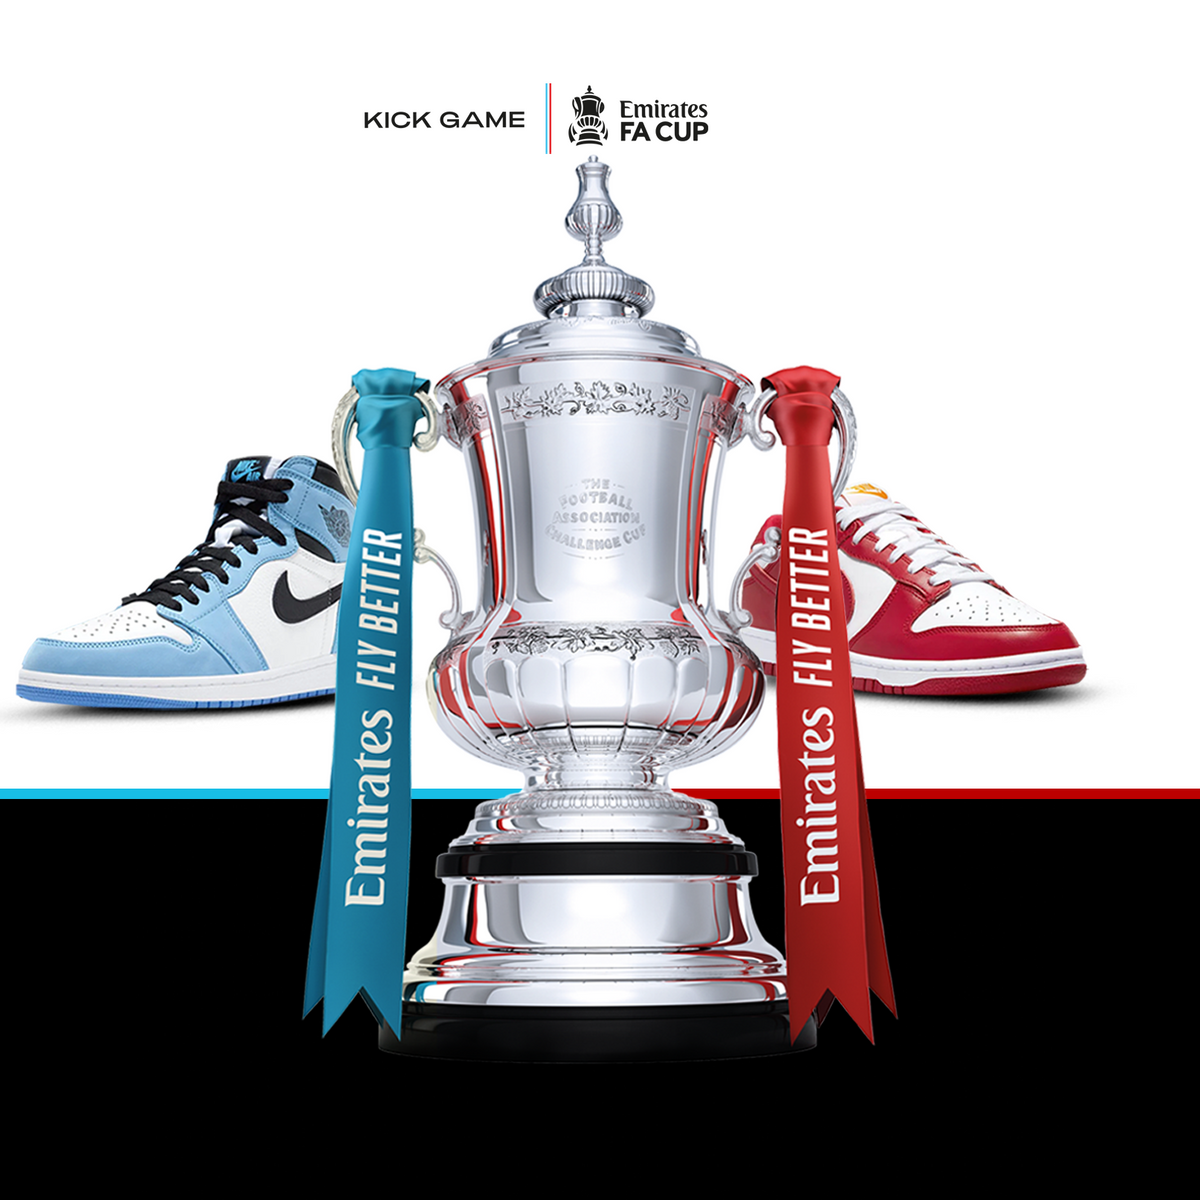 Kick Game Partnered With Emirates Fa Cup and Versus to Mark 2023’s Prestigious Game